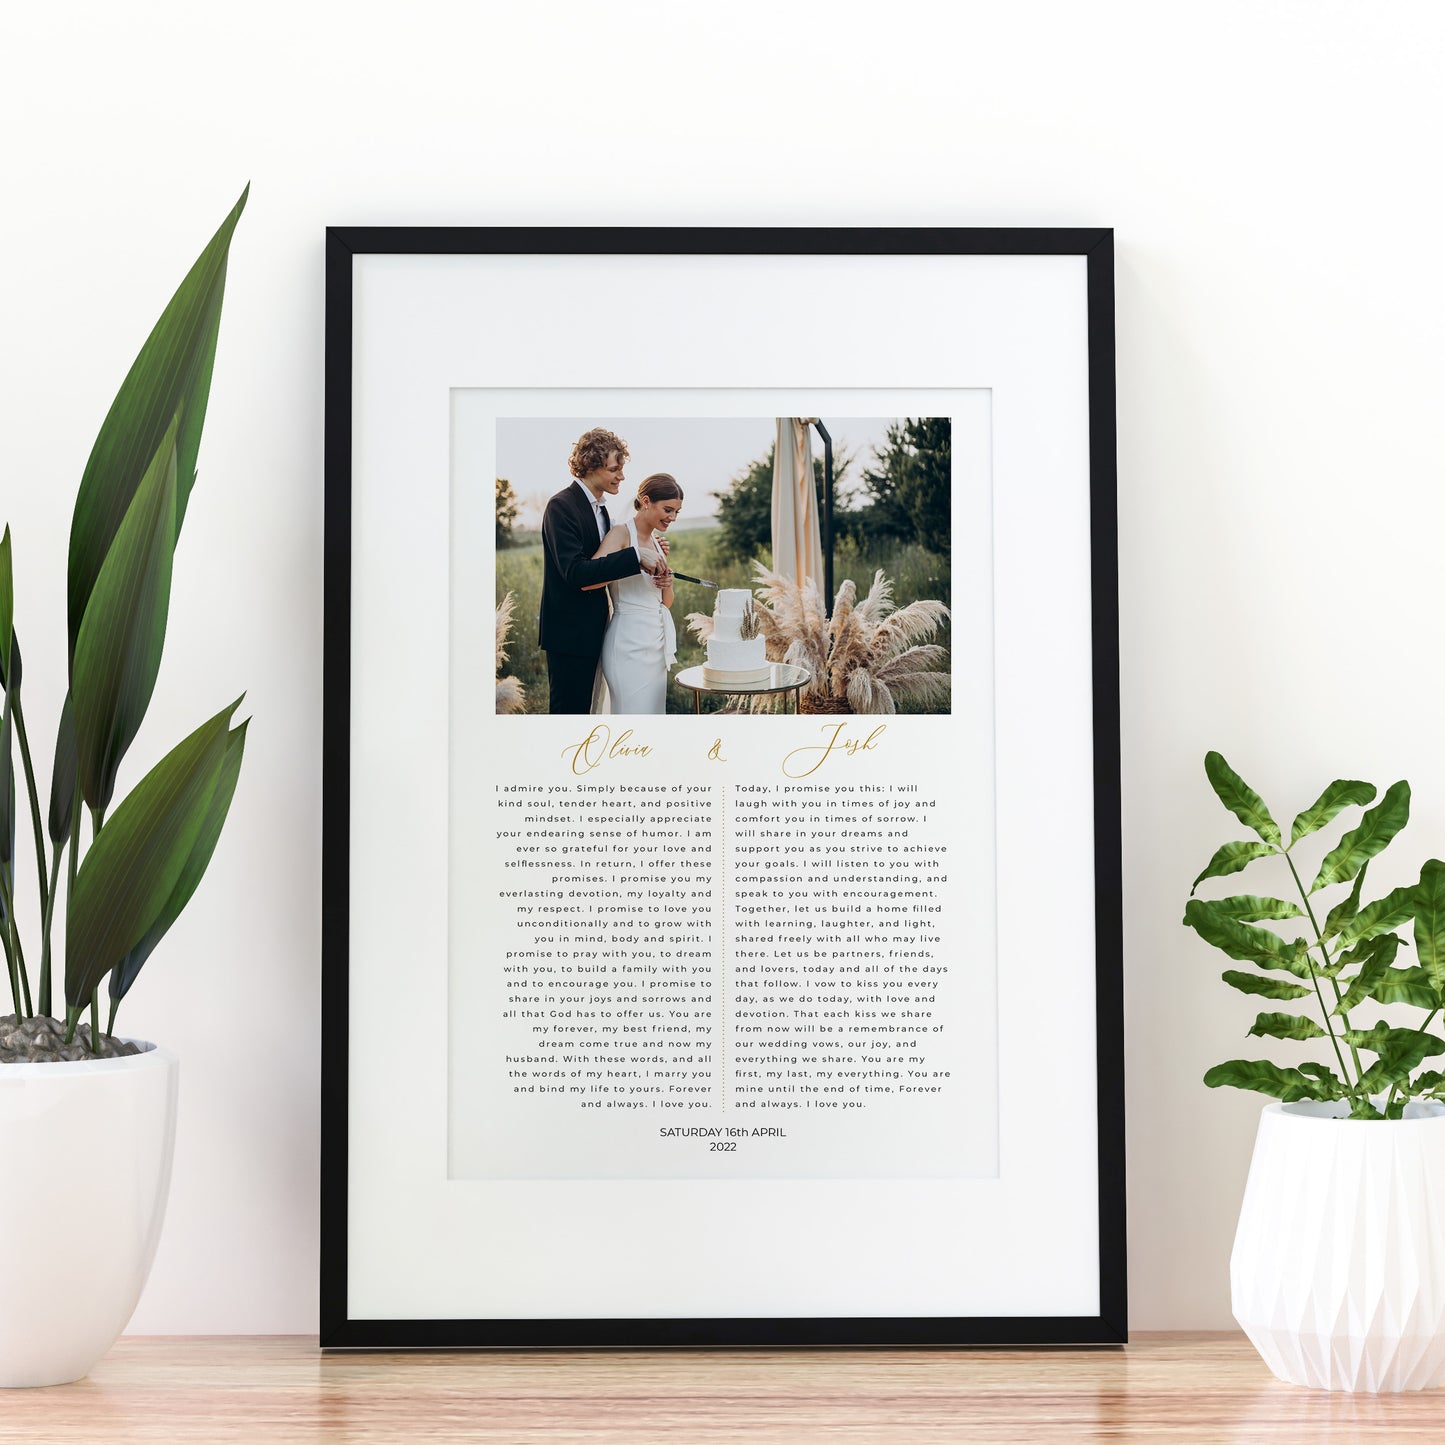 His And Her Vows Photo Print